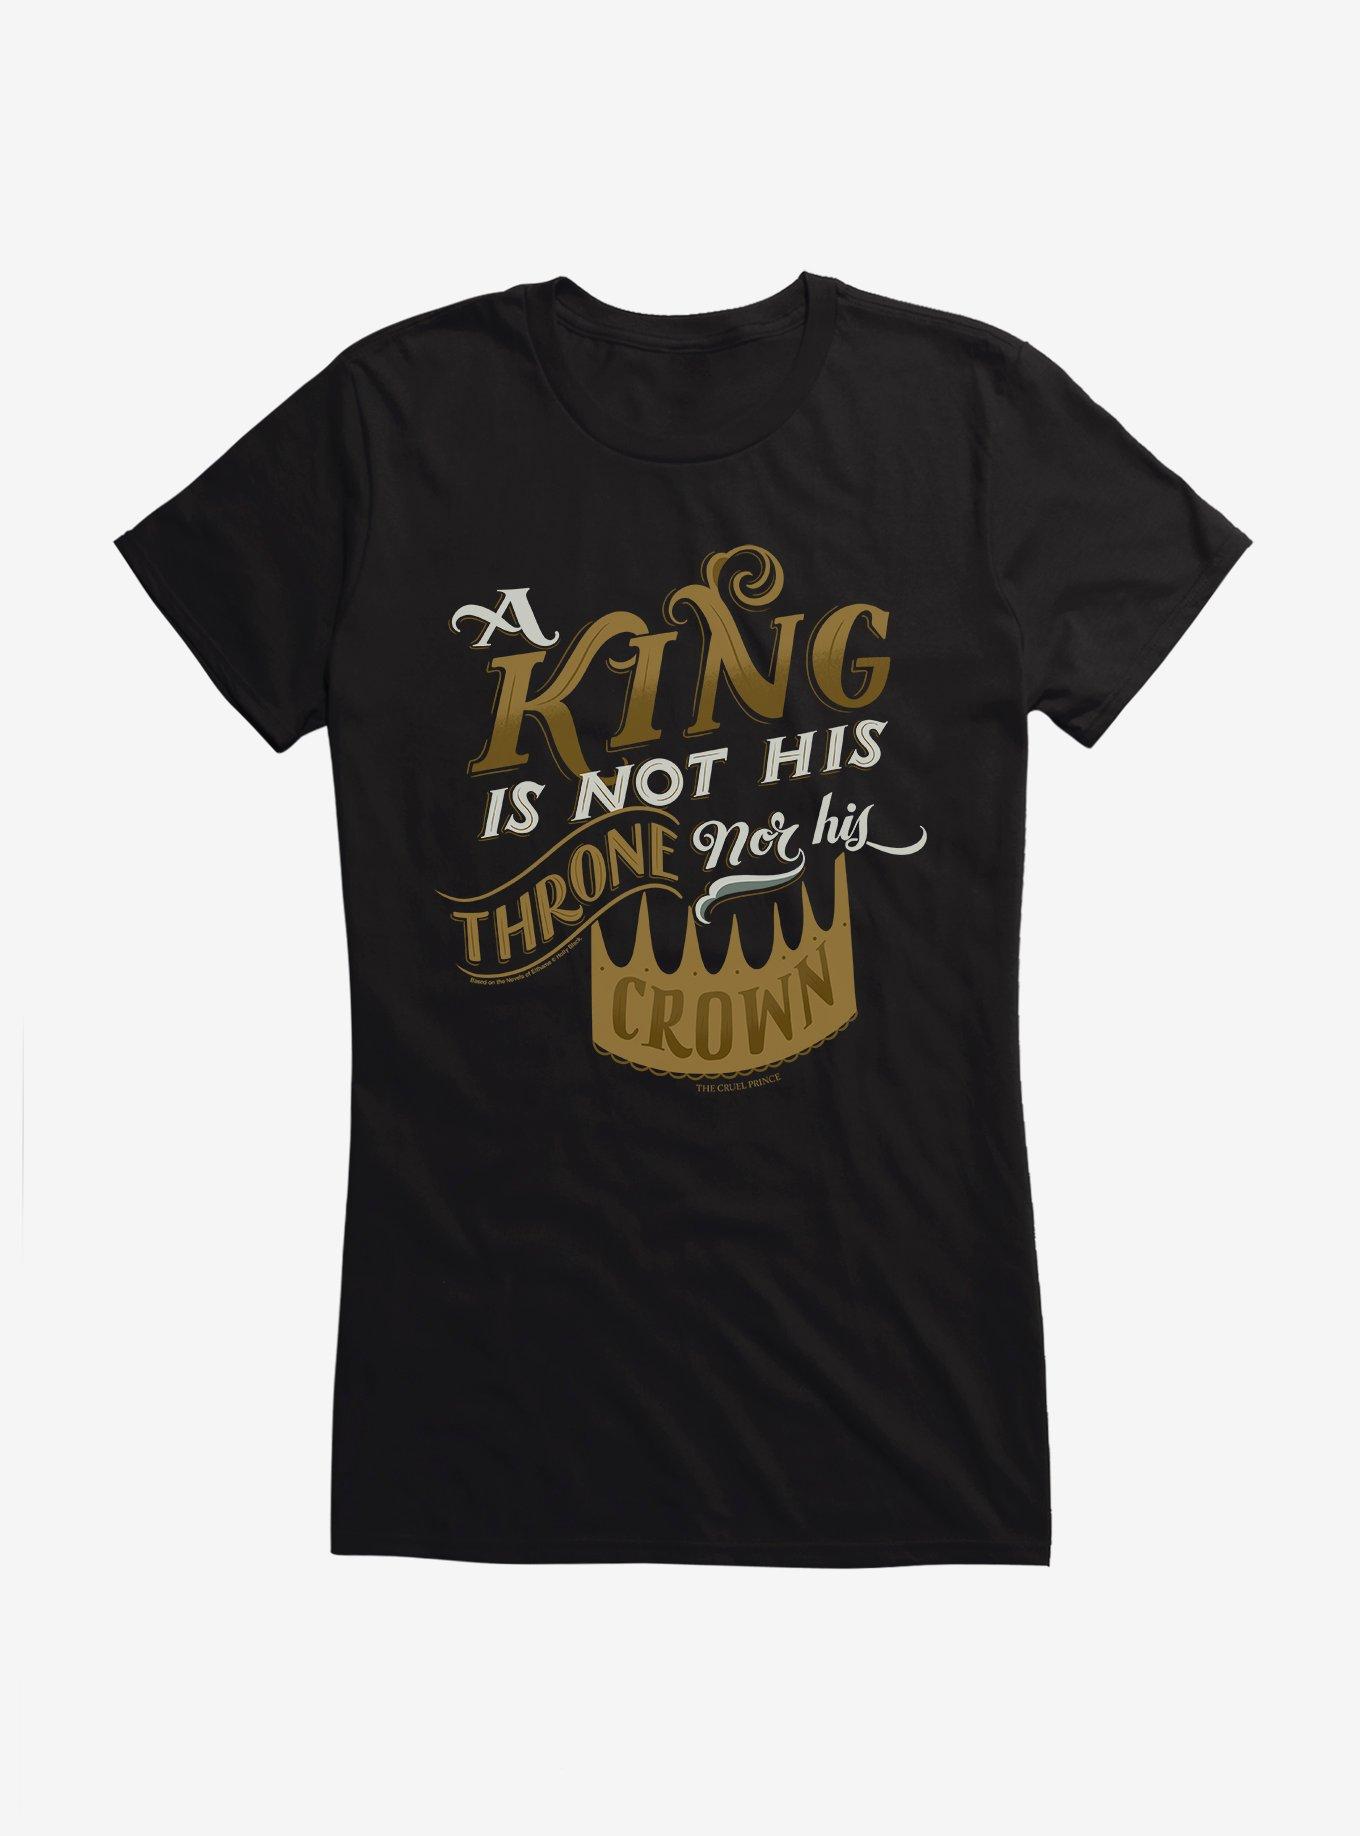 The Cruel Prince Sinister Enchantment Collection: King Is Not His Throne Nor Crown Girls T-Shirt